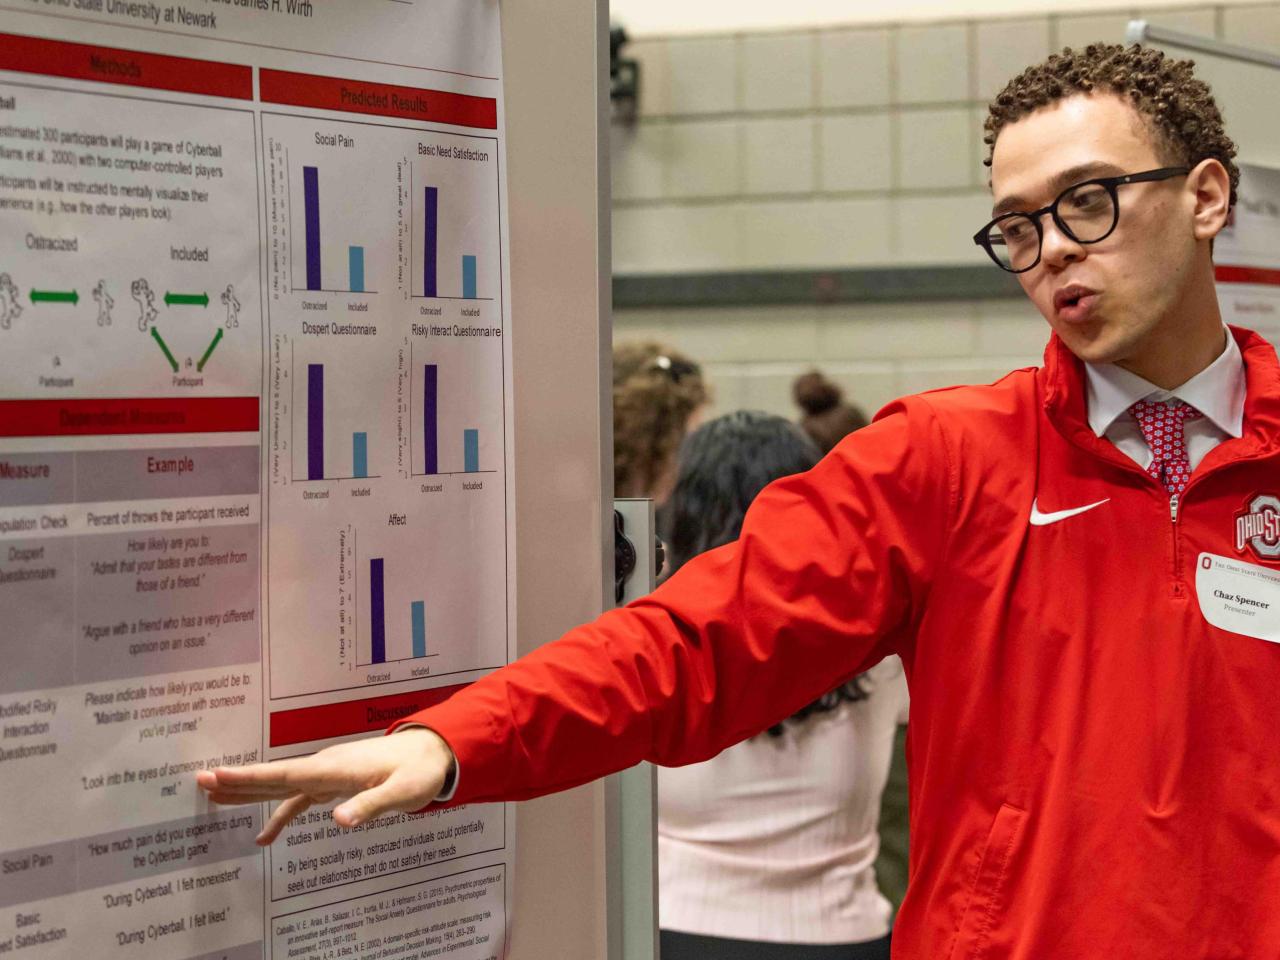 A student points to his research poster during a presentation at the Student Research and Scholarship Forum.